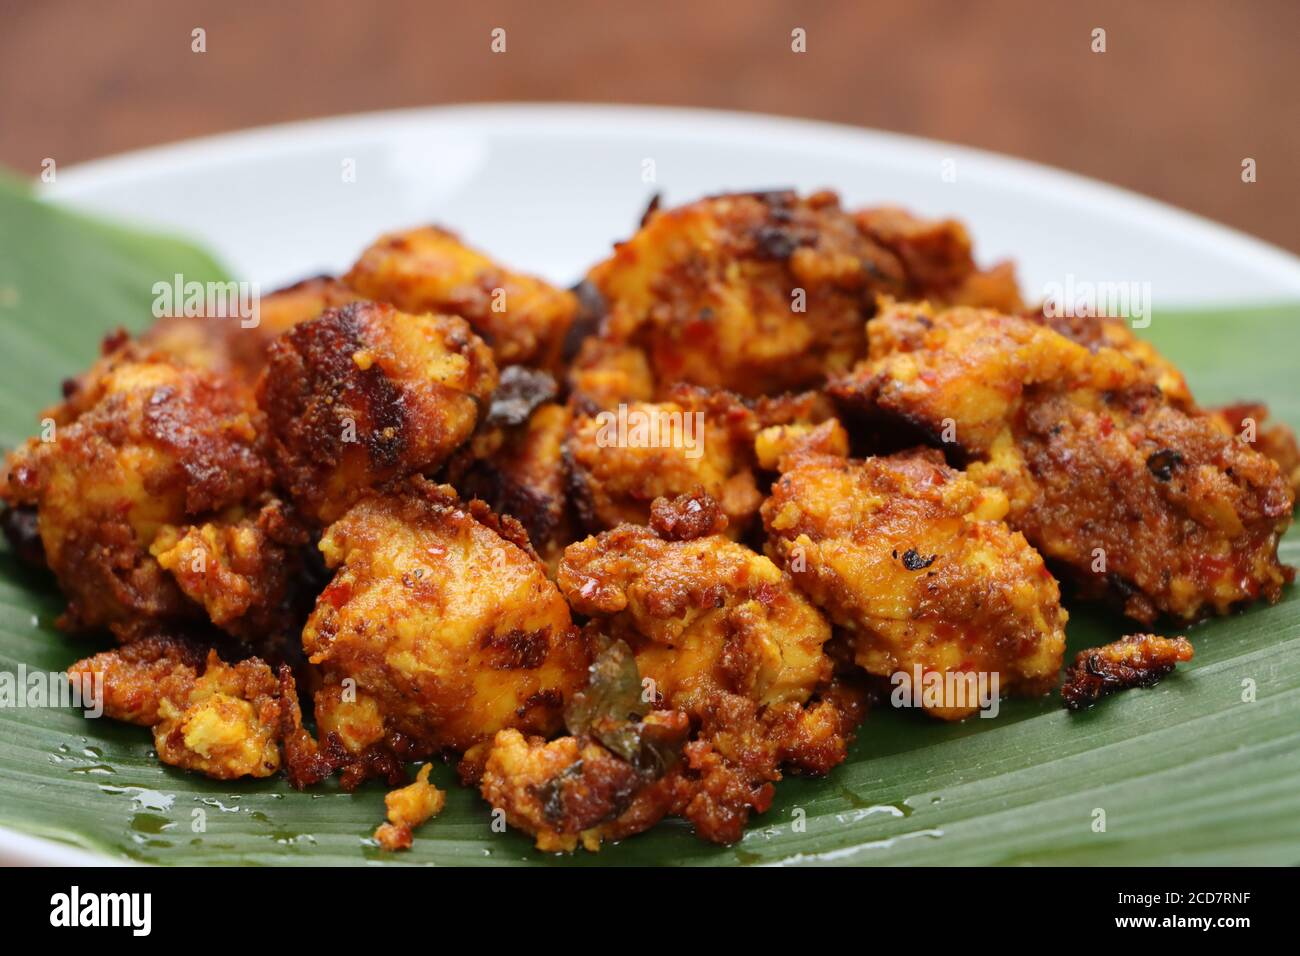 Kundapur or Malabar Paneer ghee roast, Mangalorean style, South Indian traditional food, cottage cheese roasted in butter and spices Stock Photo